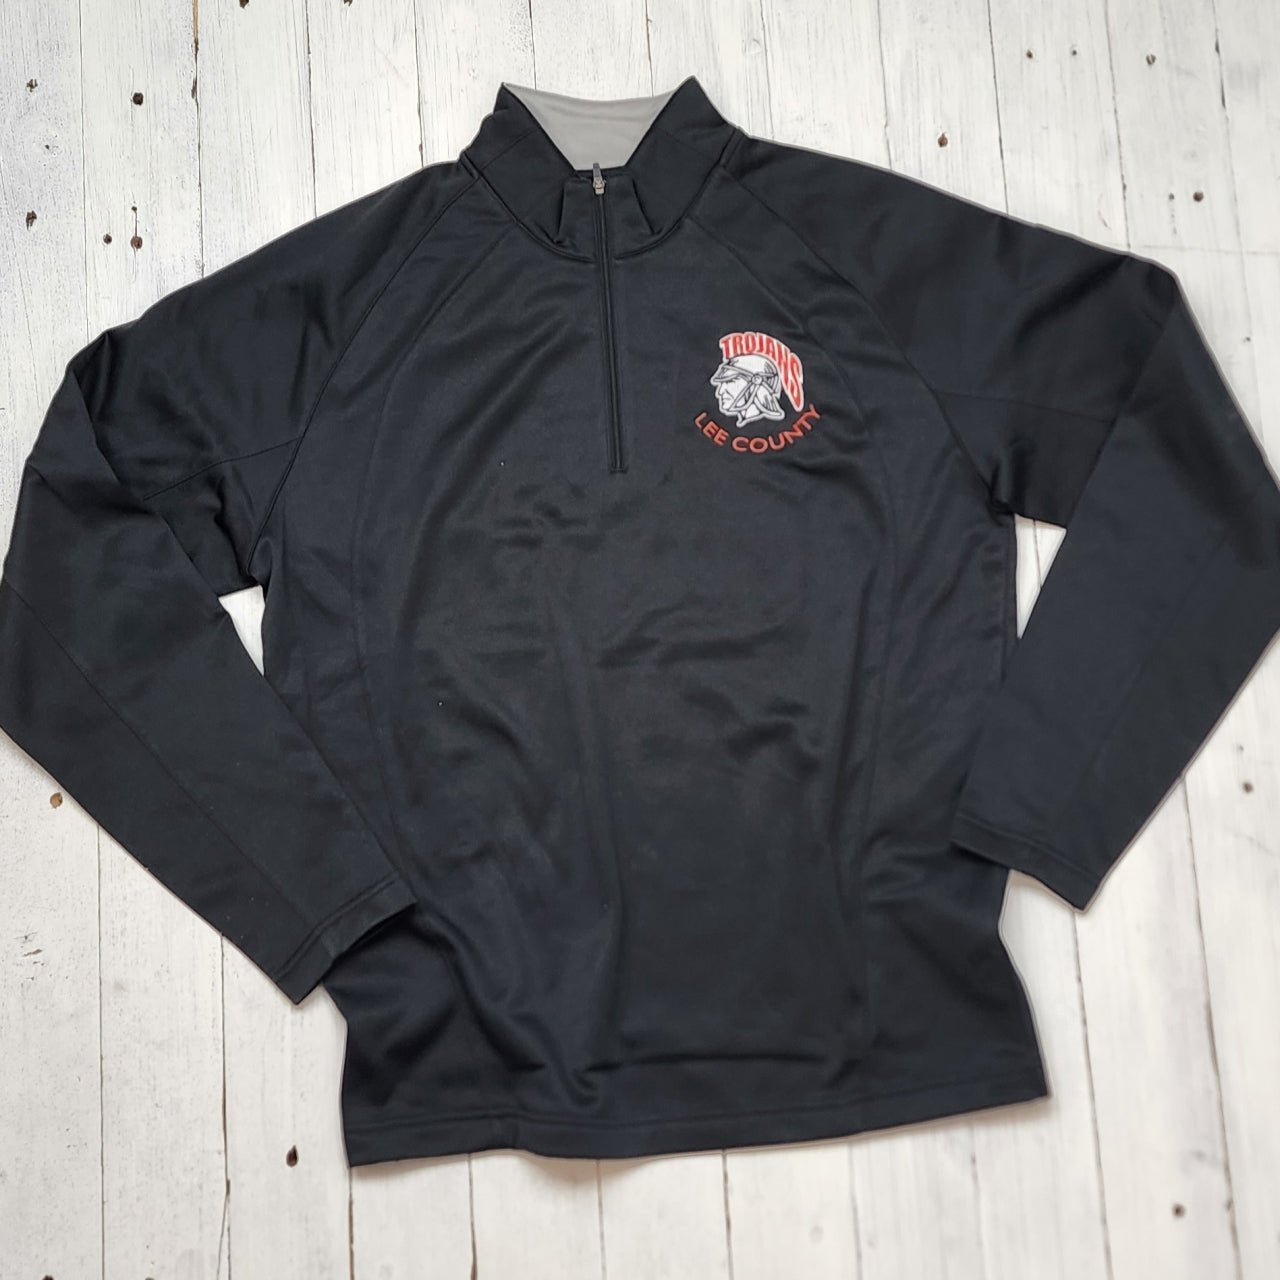 Lee County Trojans - 1/4 Zip Performance Pullover - The Graphic Tee